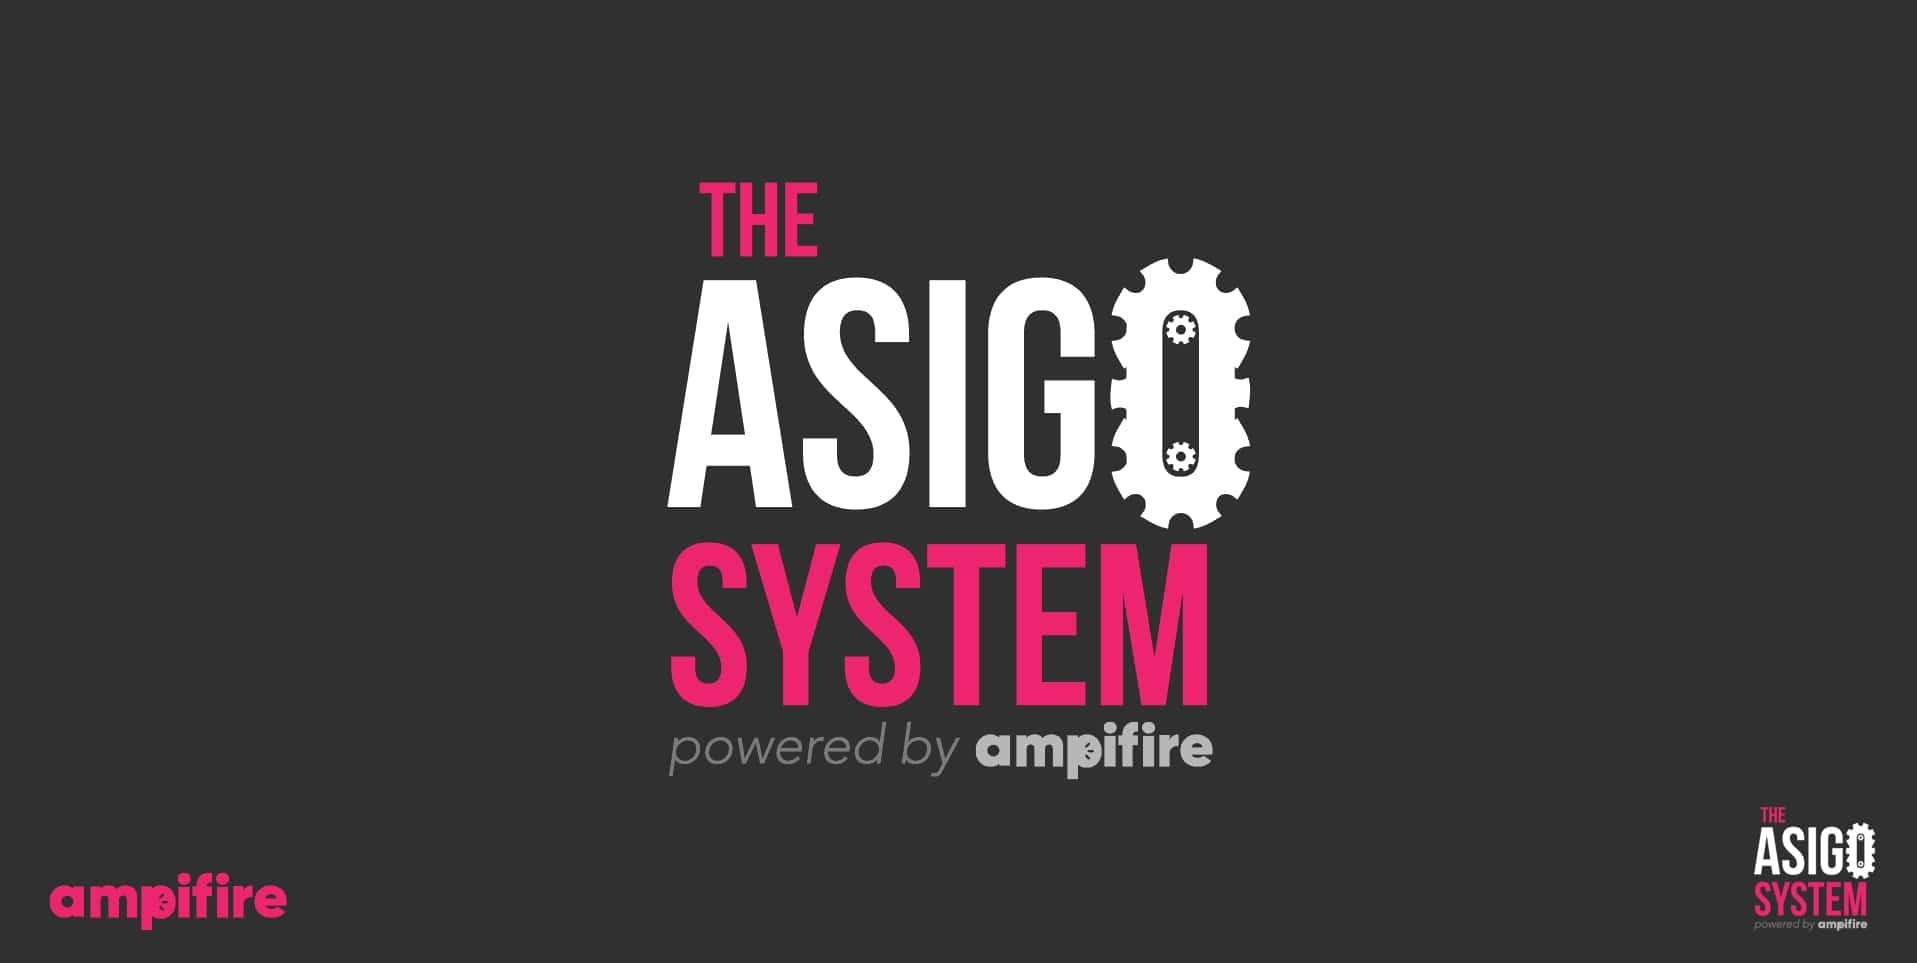 What’s The Best E-Service Dropshipping Course 2022? Try Asigo System Today!